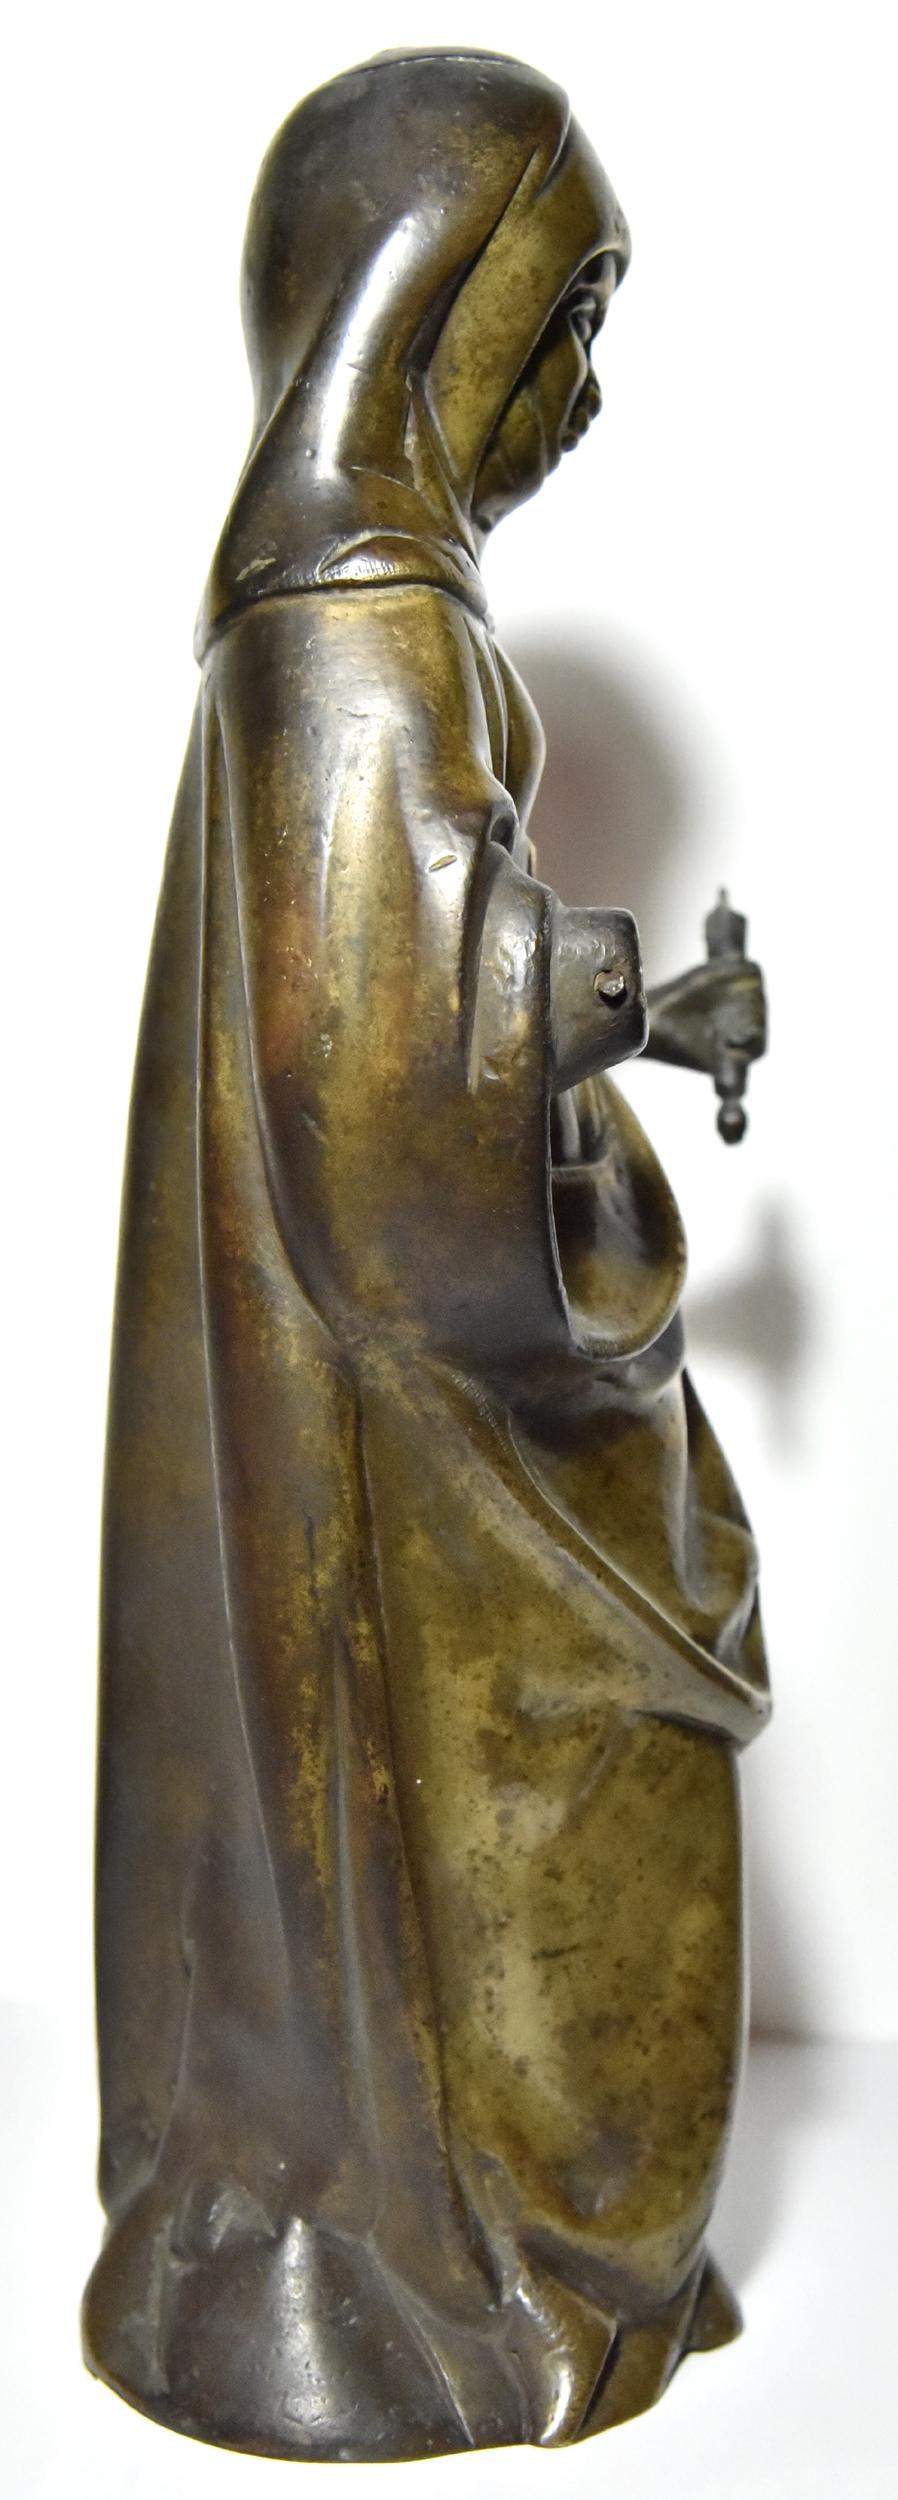 
Bronze Saint figure from the late fifteenth or early sixteenth century, Southern Netherlands perhaps Dinant

This large bronze figure is built in three parts, on the one hand the body of the saint, and on the other hands, secured by rivet. The left